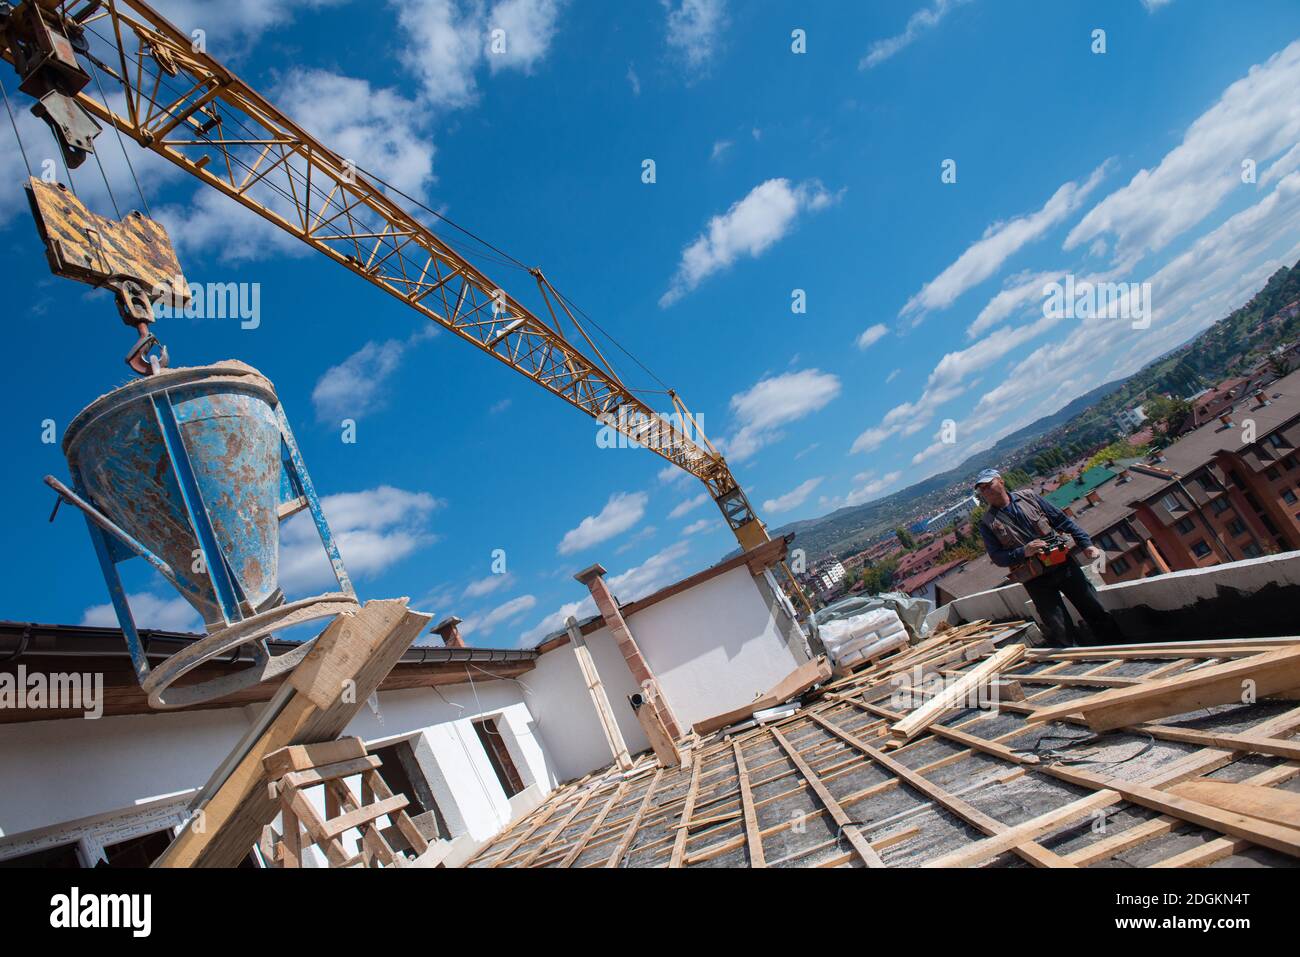 Construction worker installing a new roof Stock Photo